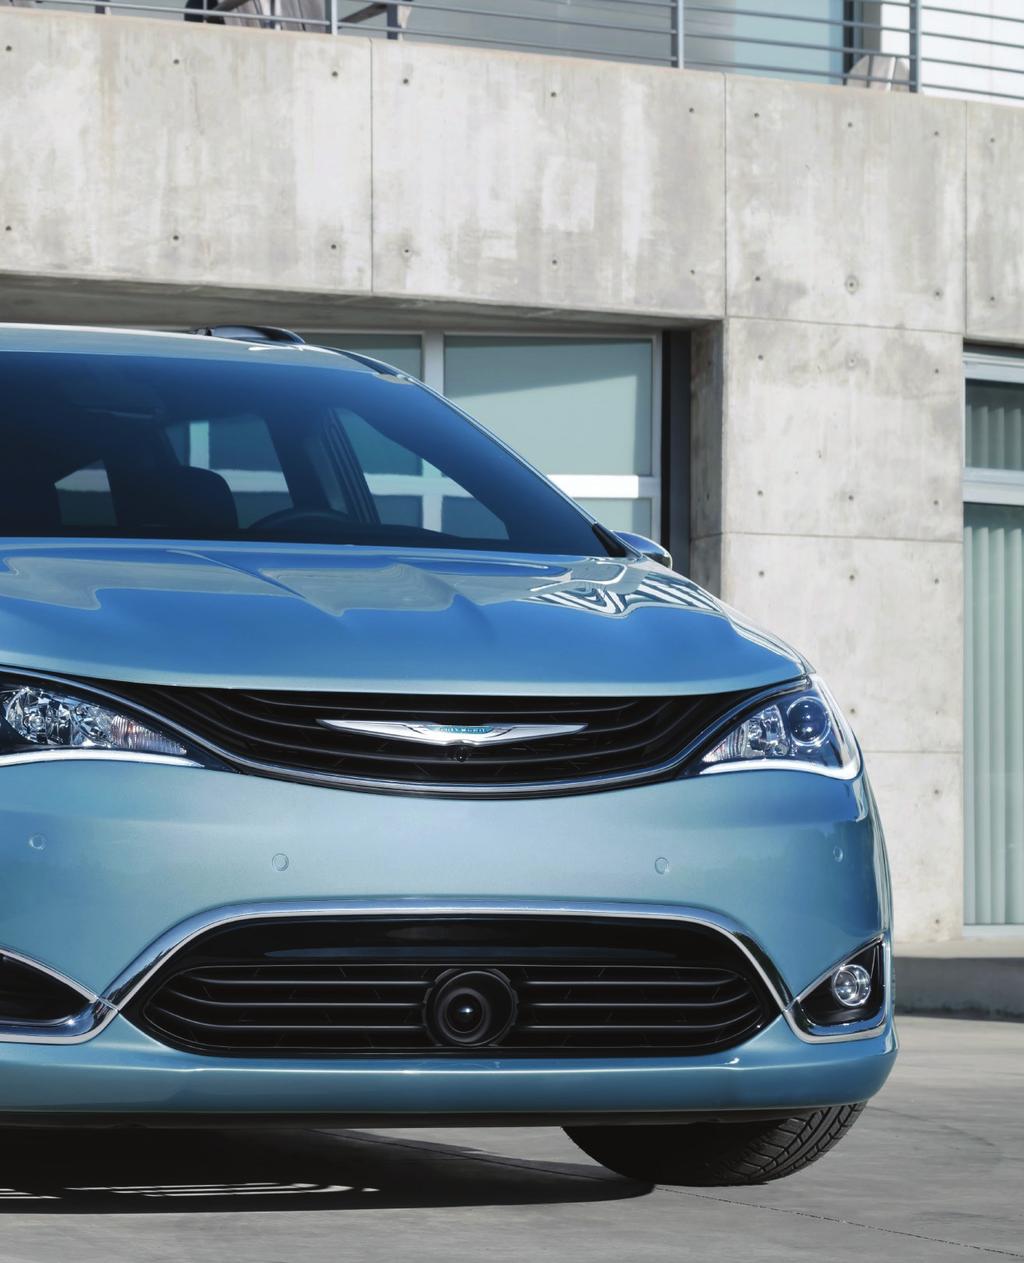 2017 Chrysler Pacifica The 2017 model year is to some extent more of the same but different.